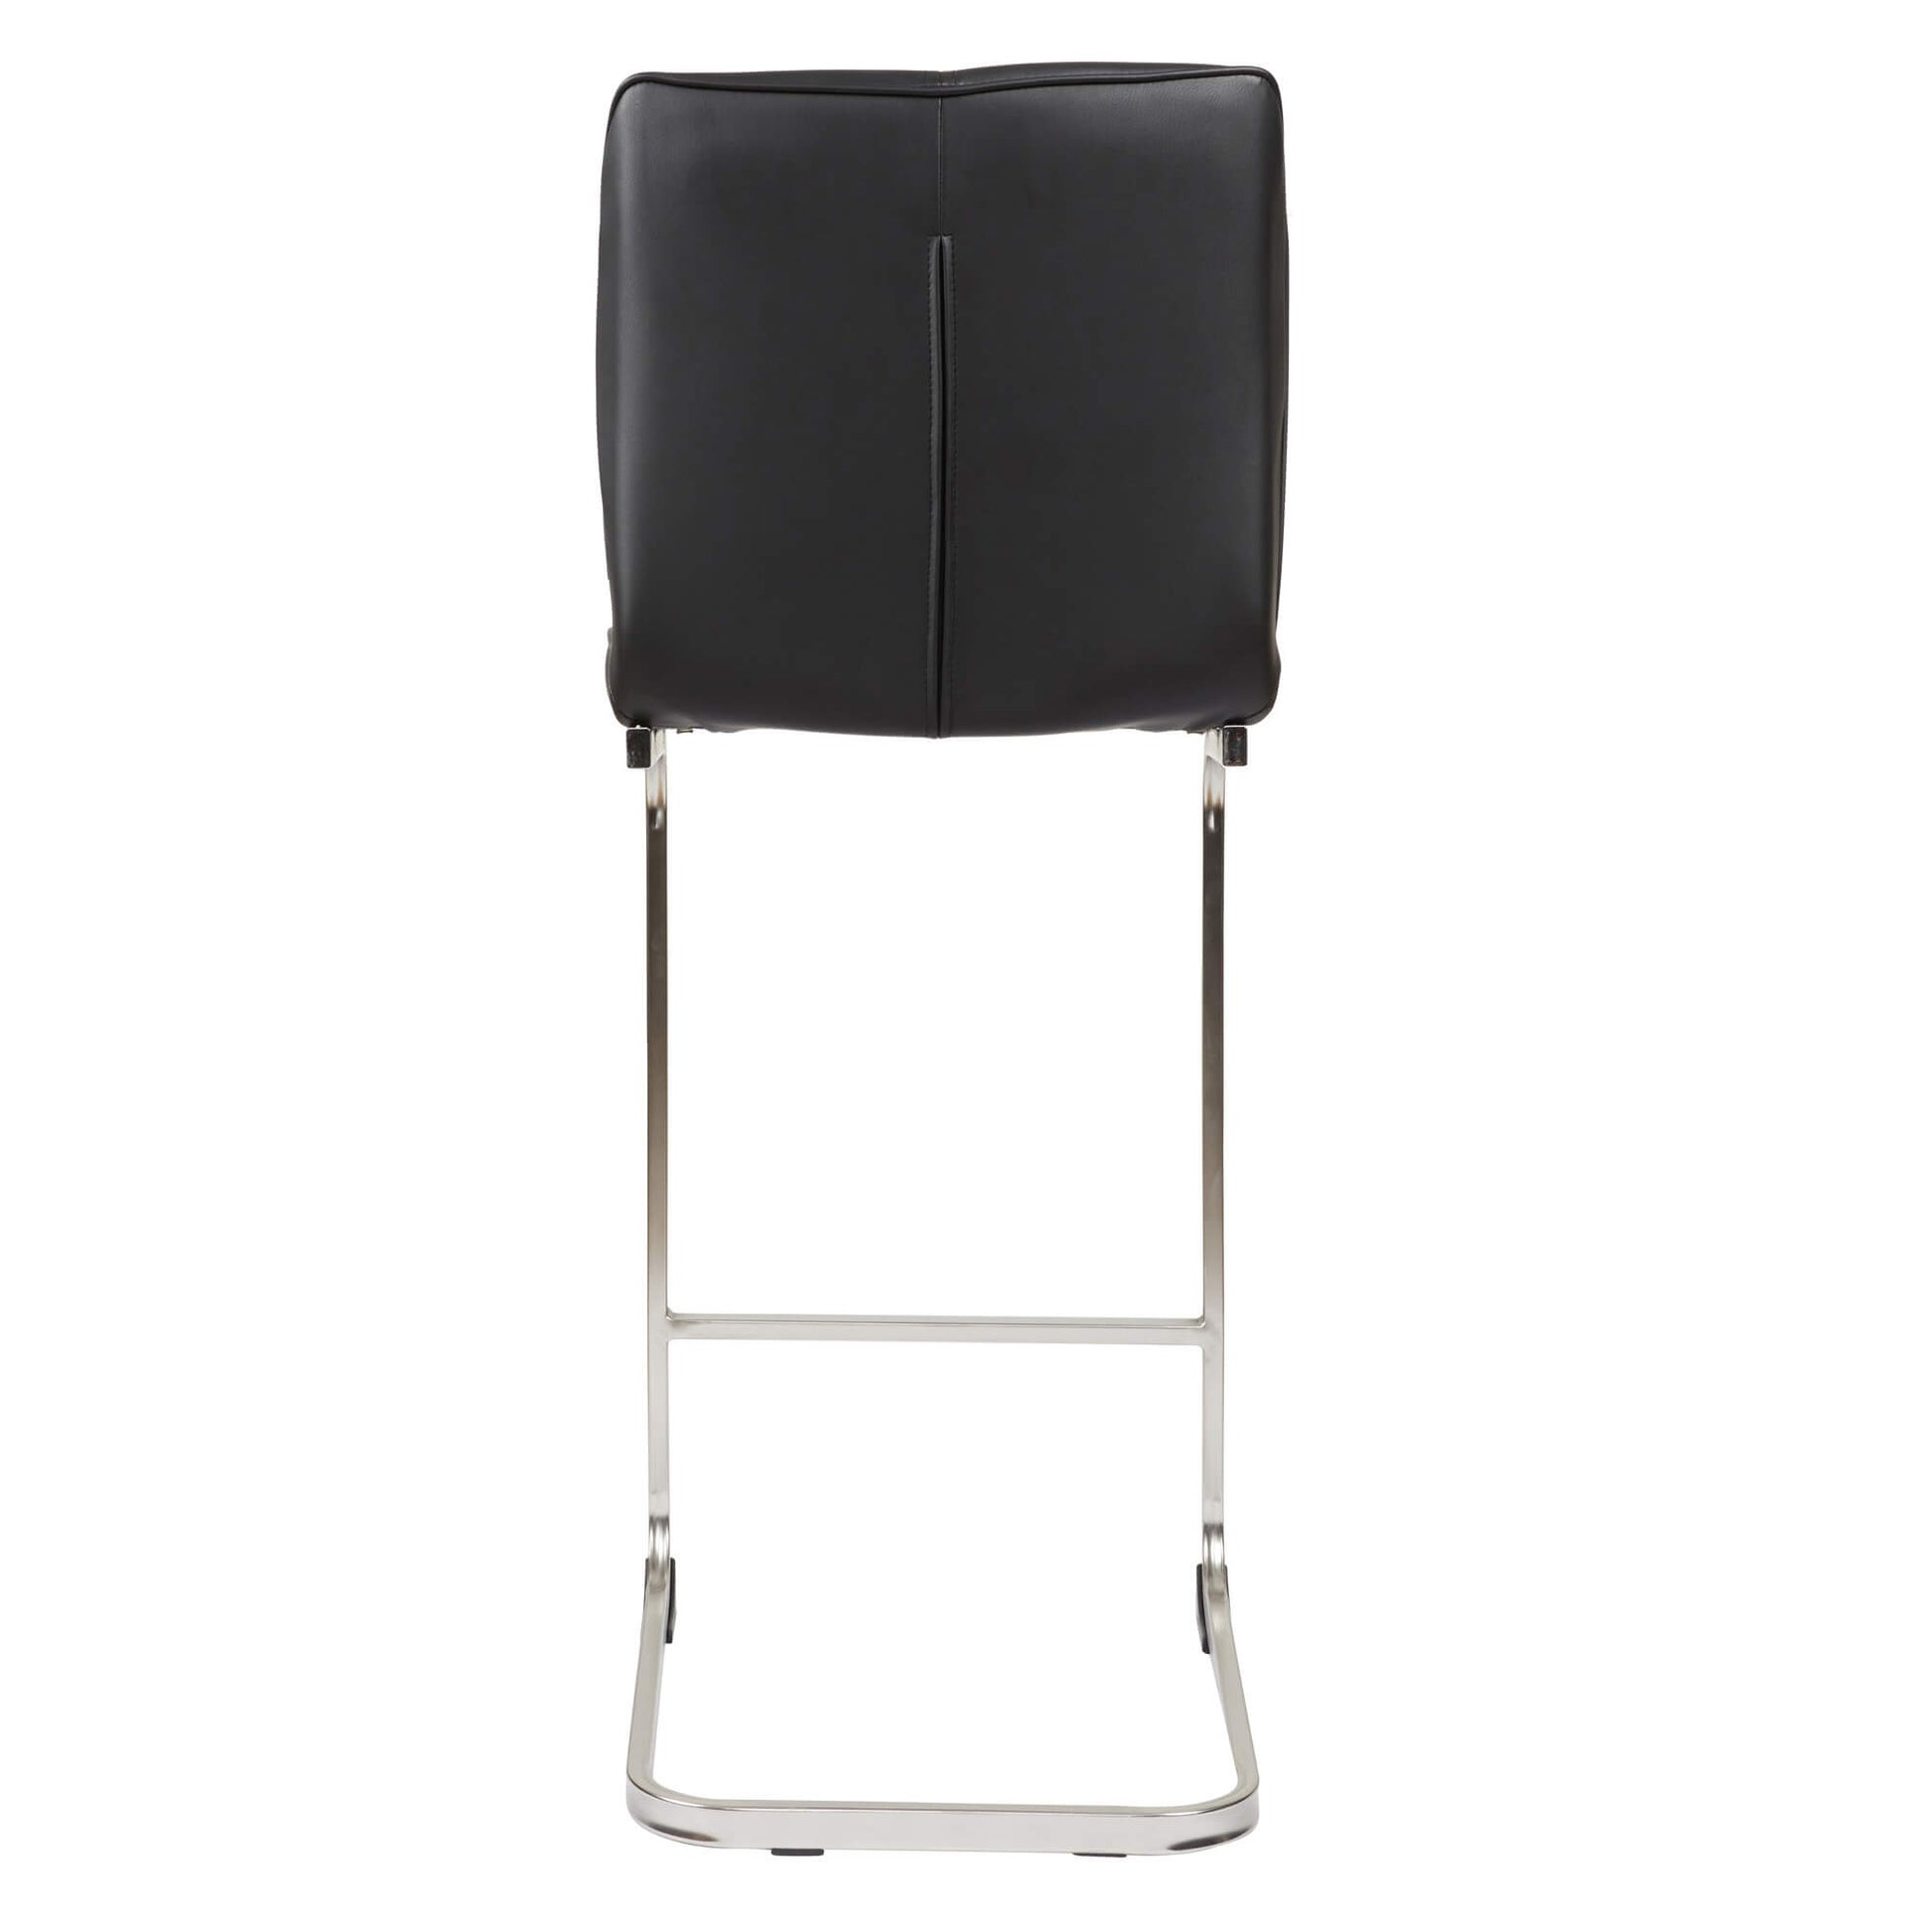 Lawry | Contemporary Metal PU Leather Bar Stools | Set Of 2 | Black